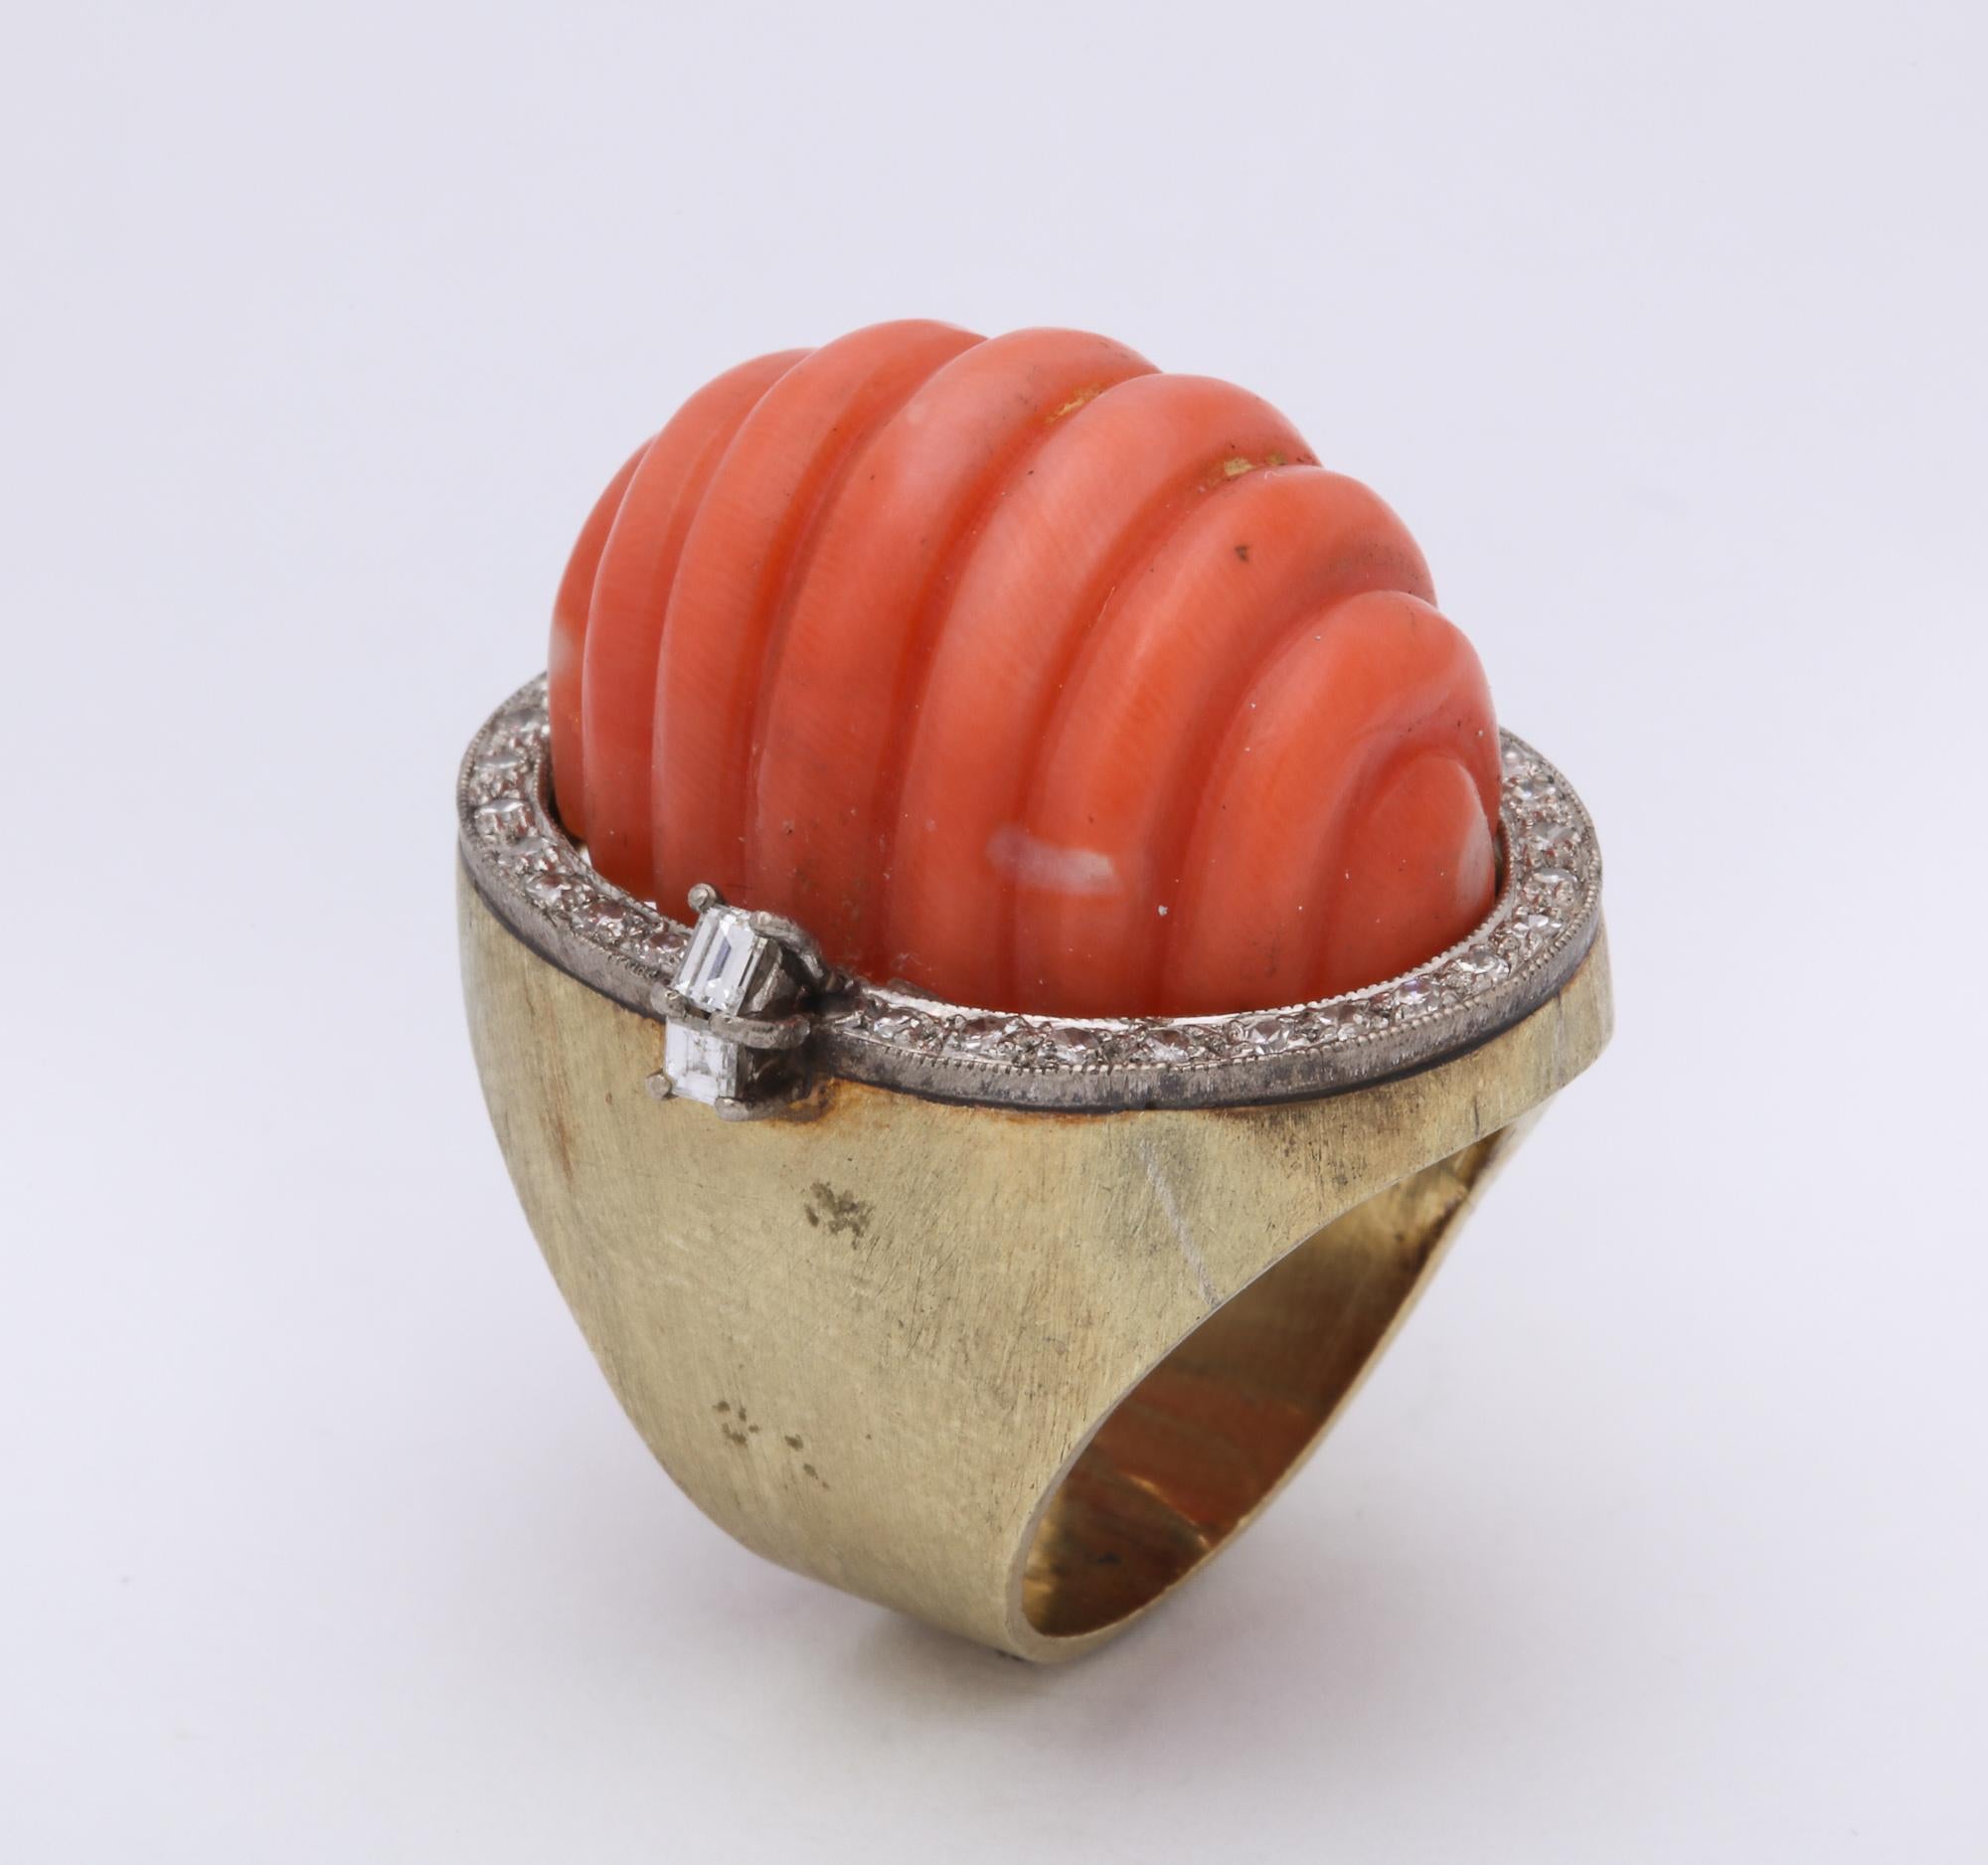 One Ladies Large 14kt Gold Fluted Coral Ring Embellished With Numerous Diamonds Around Edge Of Large Carved Coral. Ring Is Furher Flanked By Two Emerald Cut Diamonds. Current Ring Size 6 And May Easily Be Resized To Any Size Required. Created In The